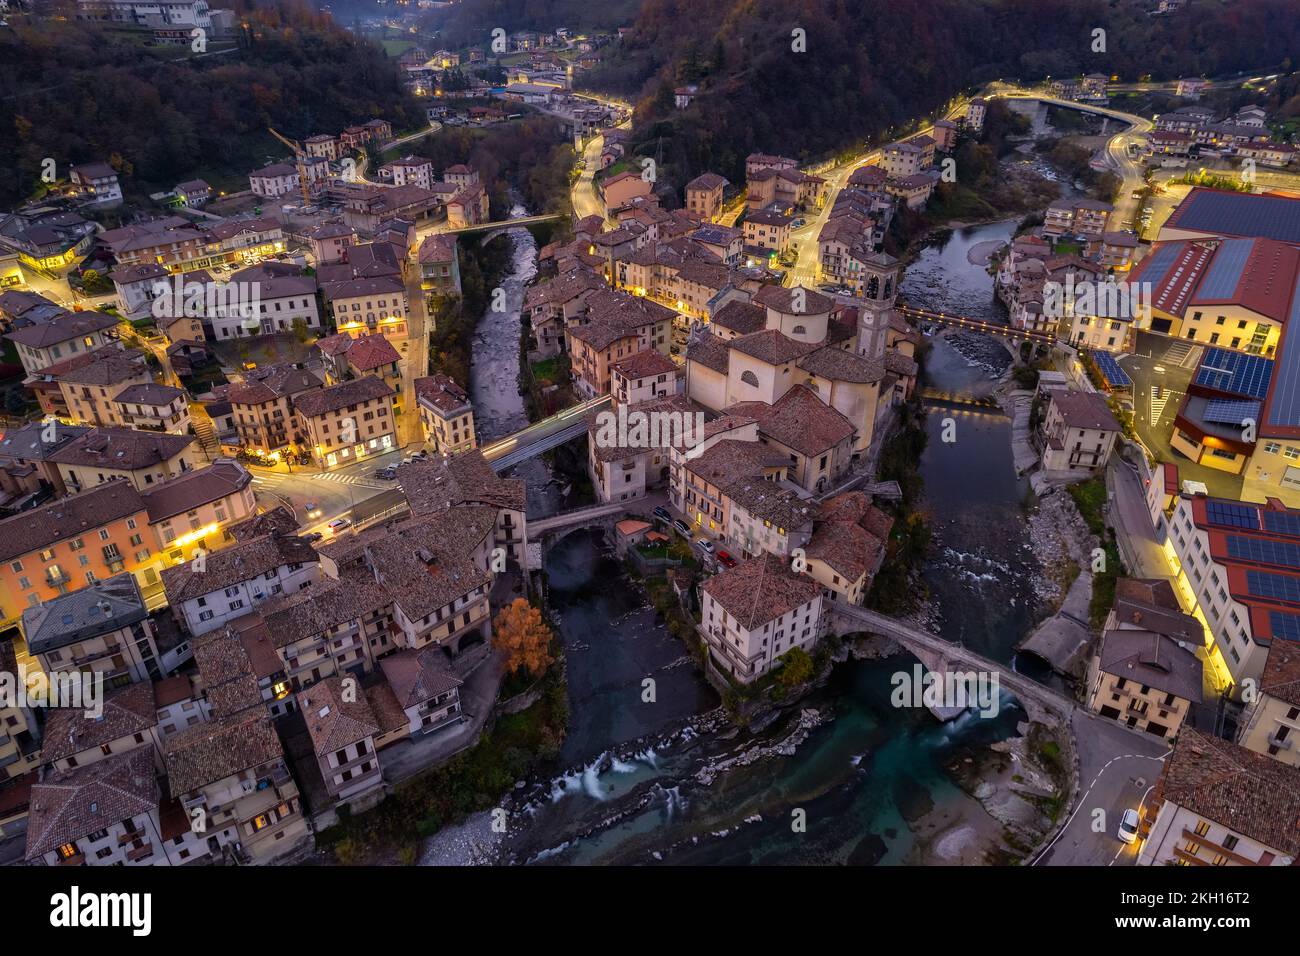 Aerial view of old church and crossing rivers surrounded by Alps mountains, San Giovanni Bianco Village, Valbrembana, Bergamo, Lombardy, Italy Stock Photo